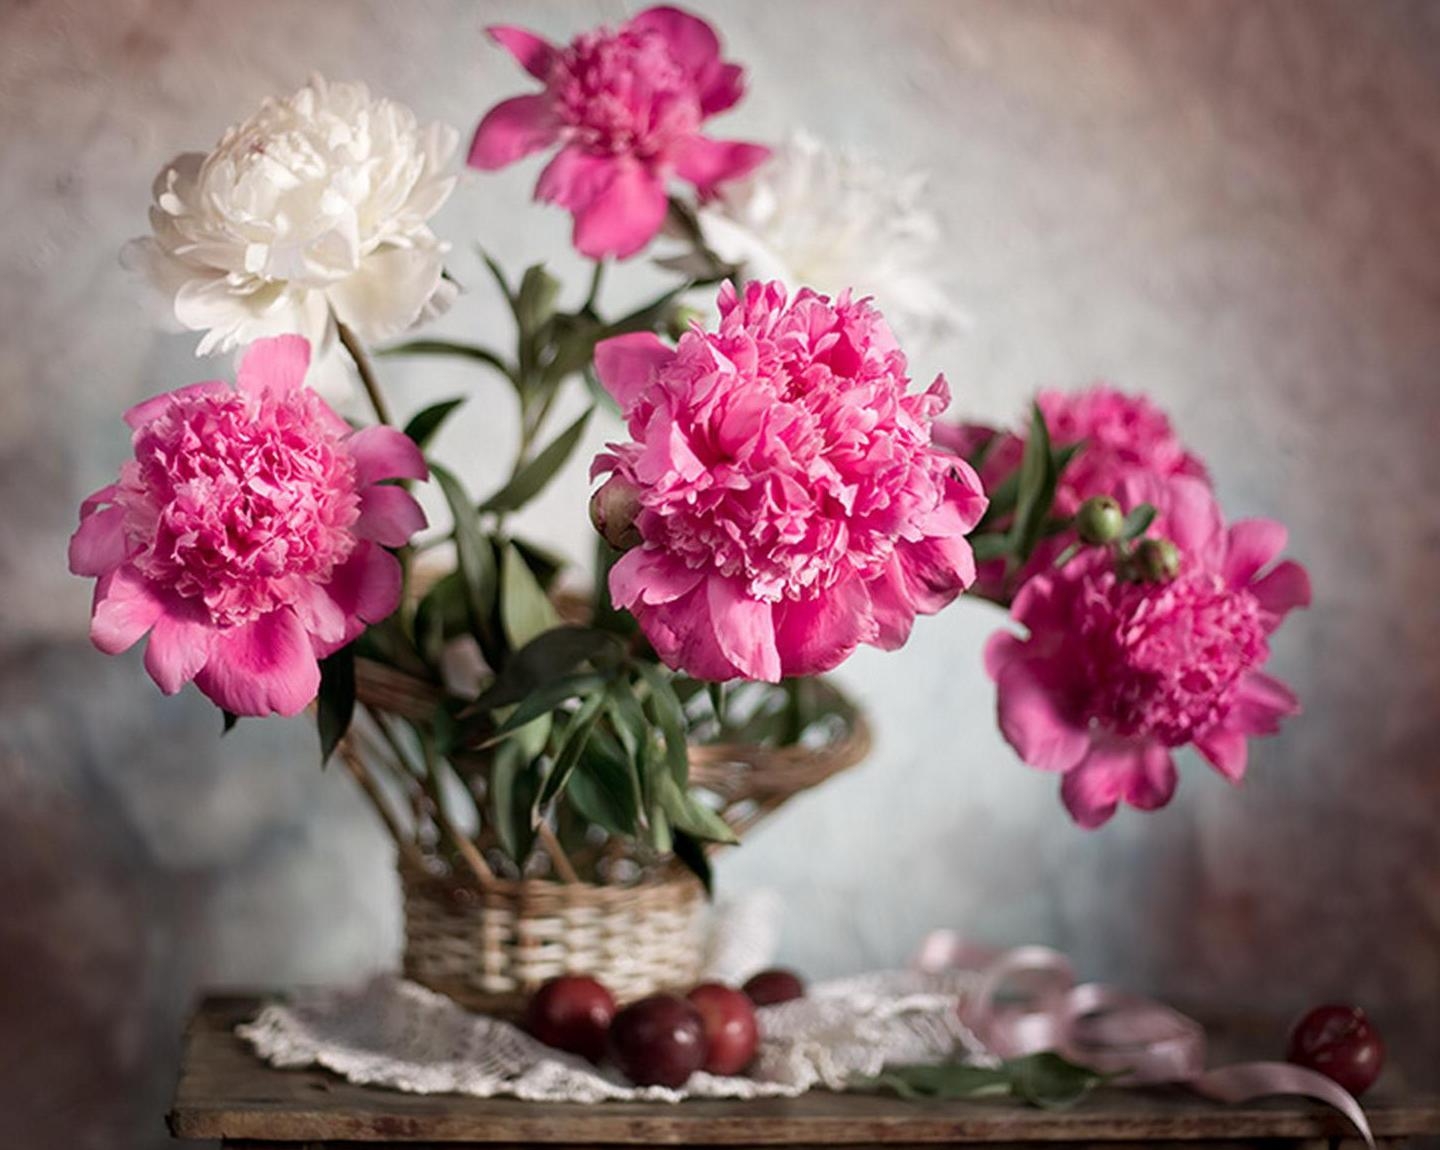 65358 download wallpaper flowers, peonies, blur, smooth, bouquet, tape, basket screensavers and pictures for free